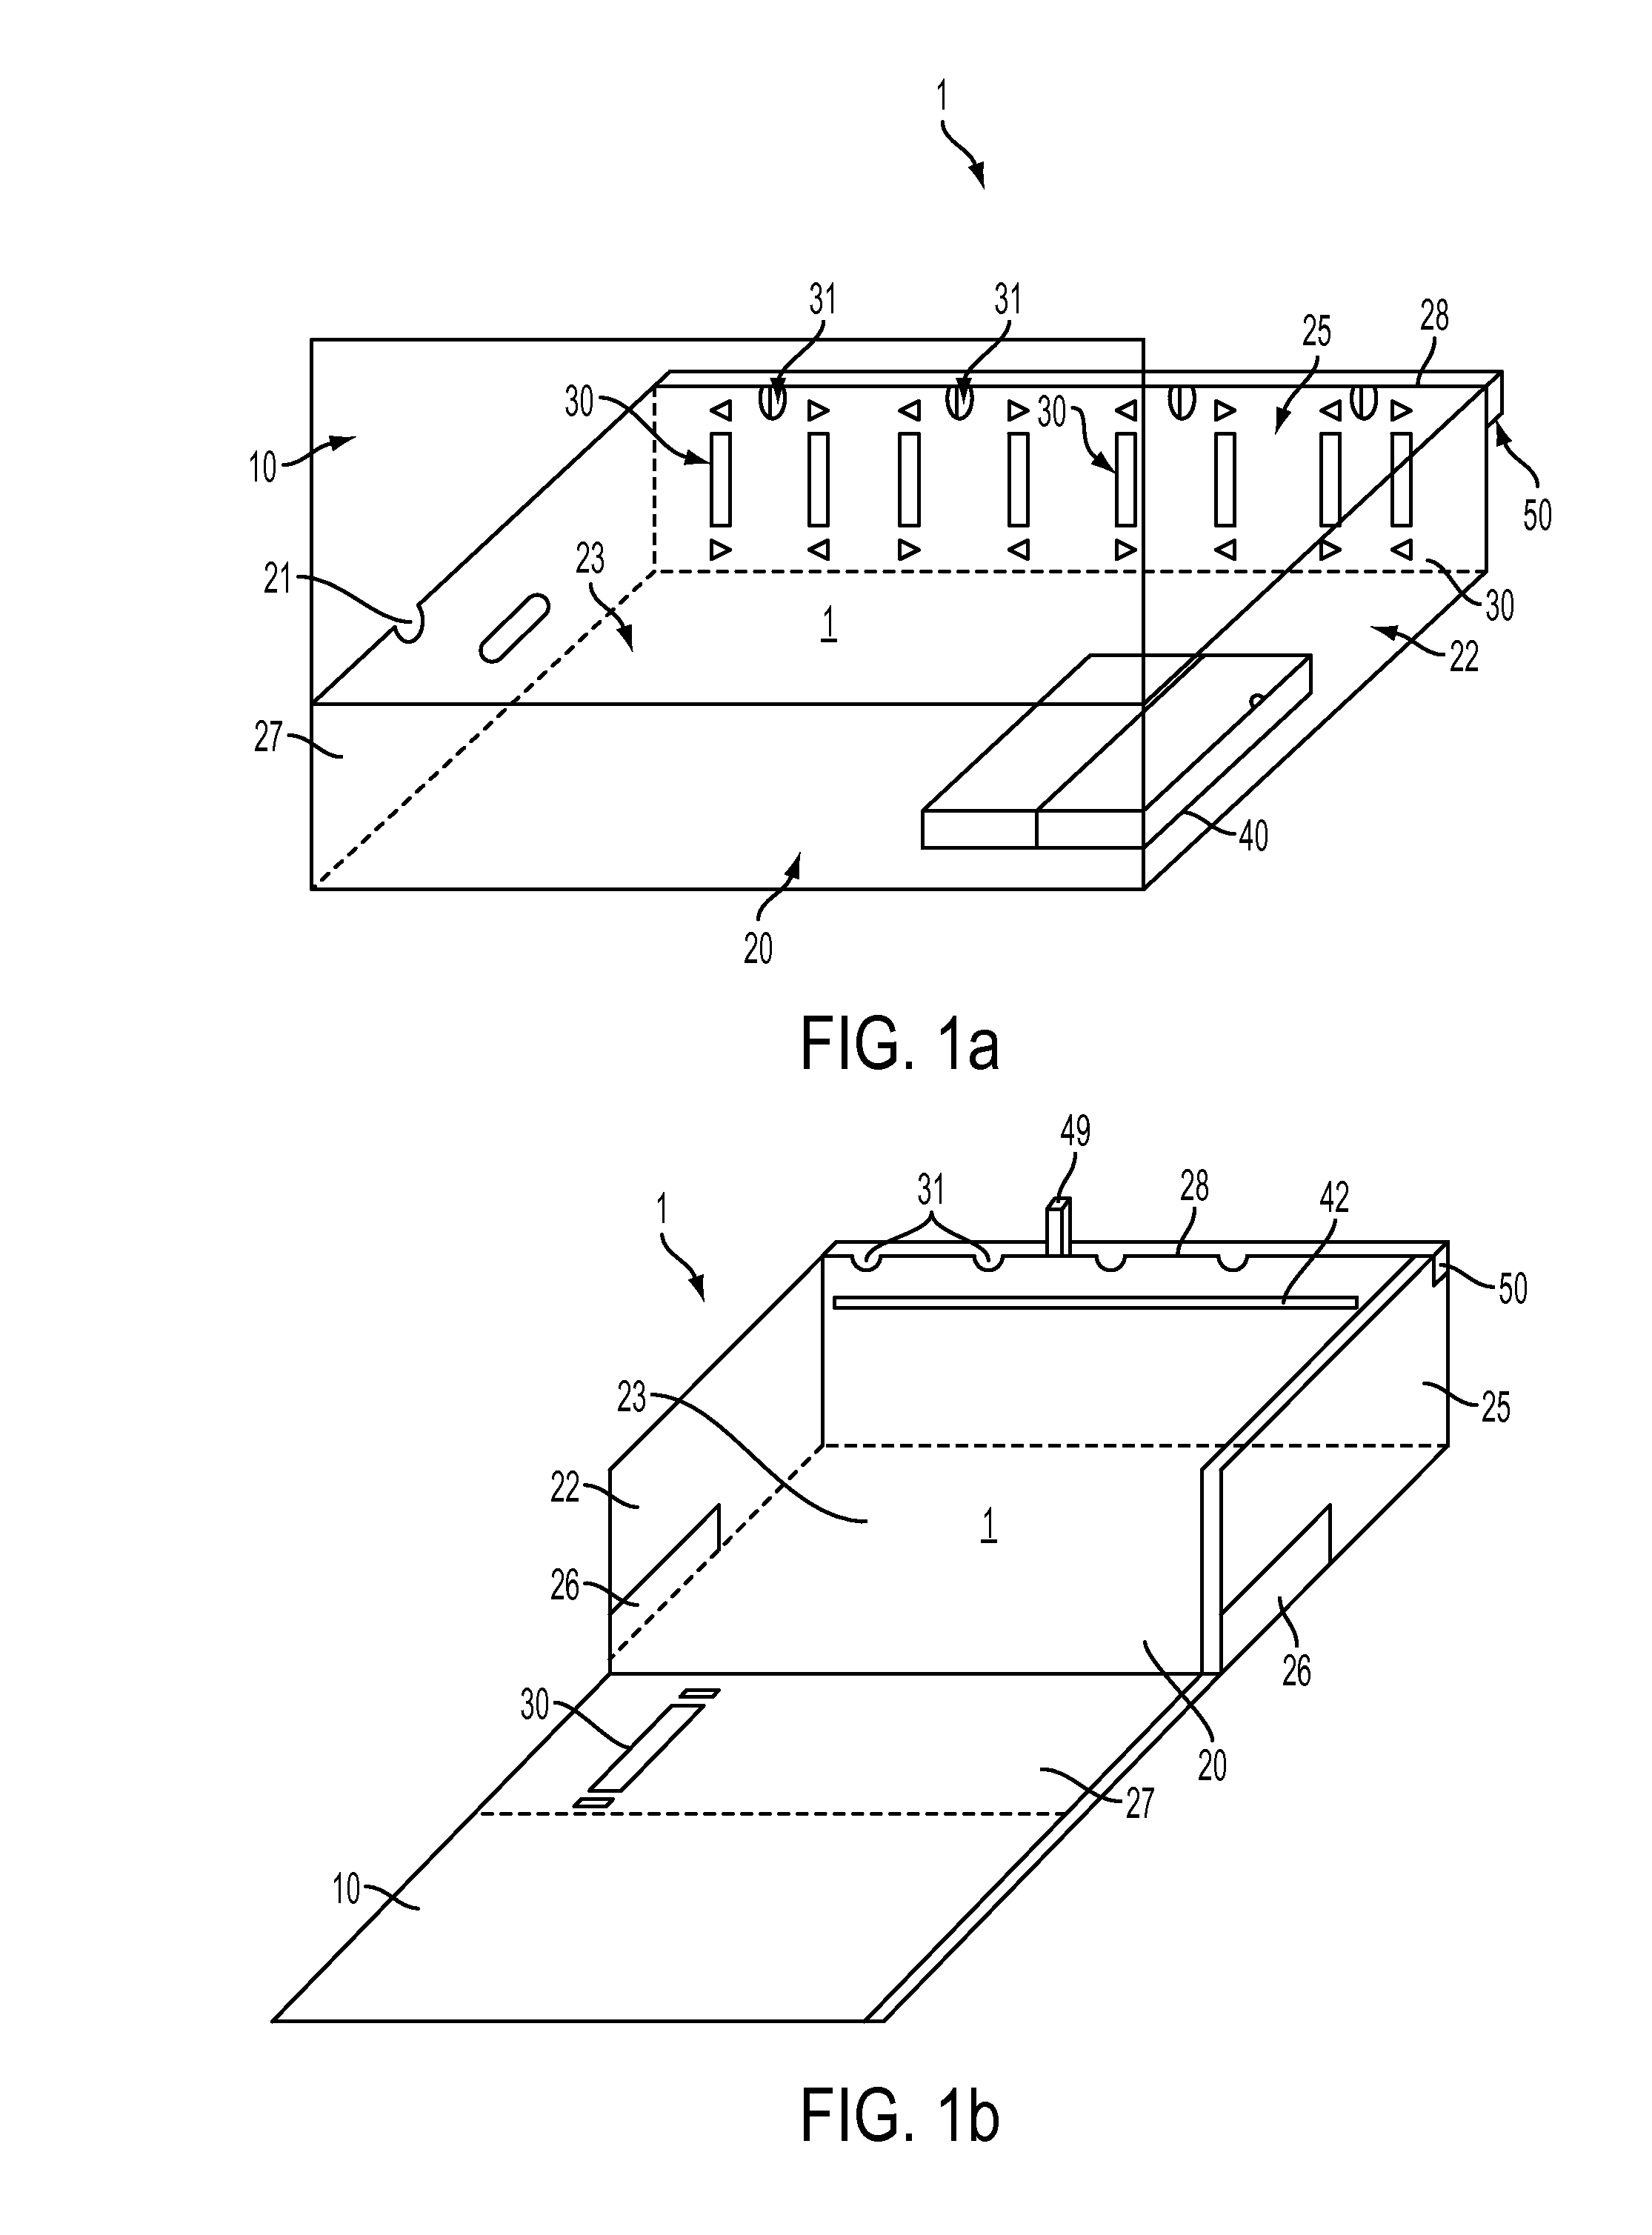 System and Apparatus For Managing and Organizing Electrical Cords and Cables